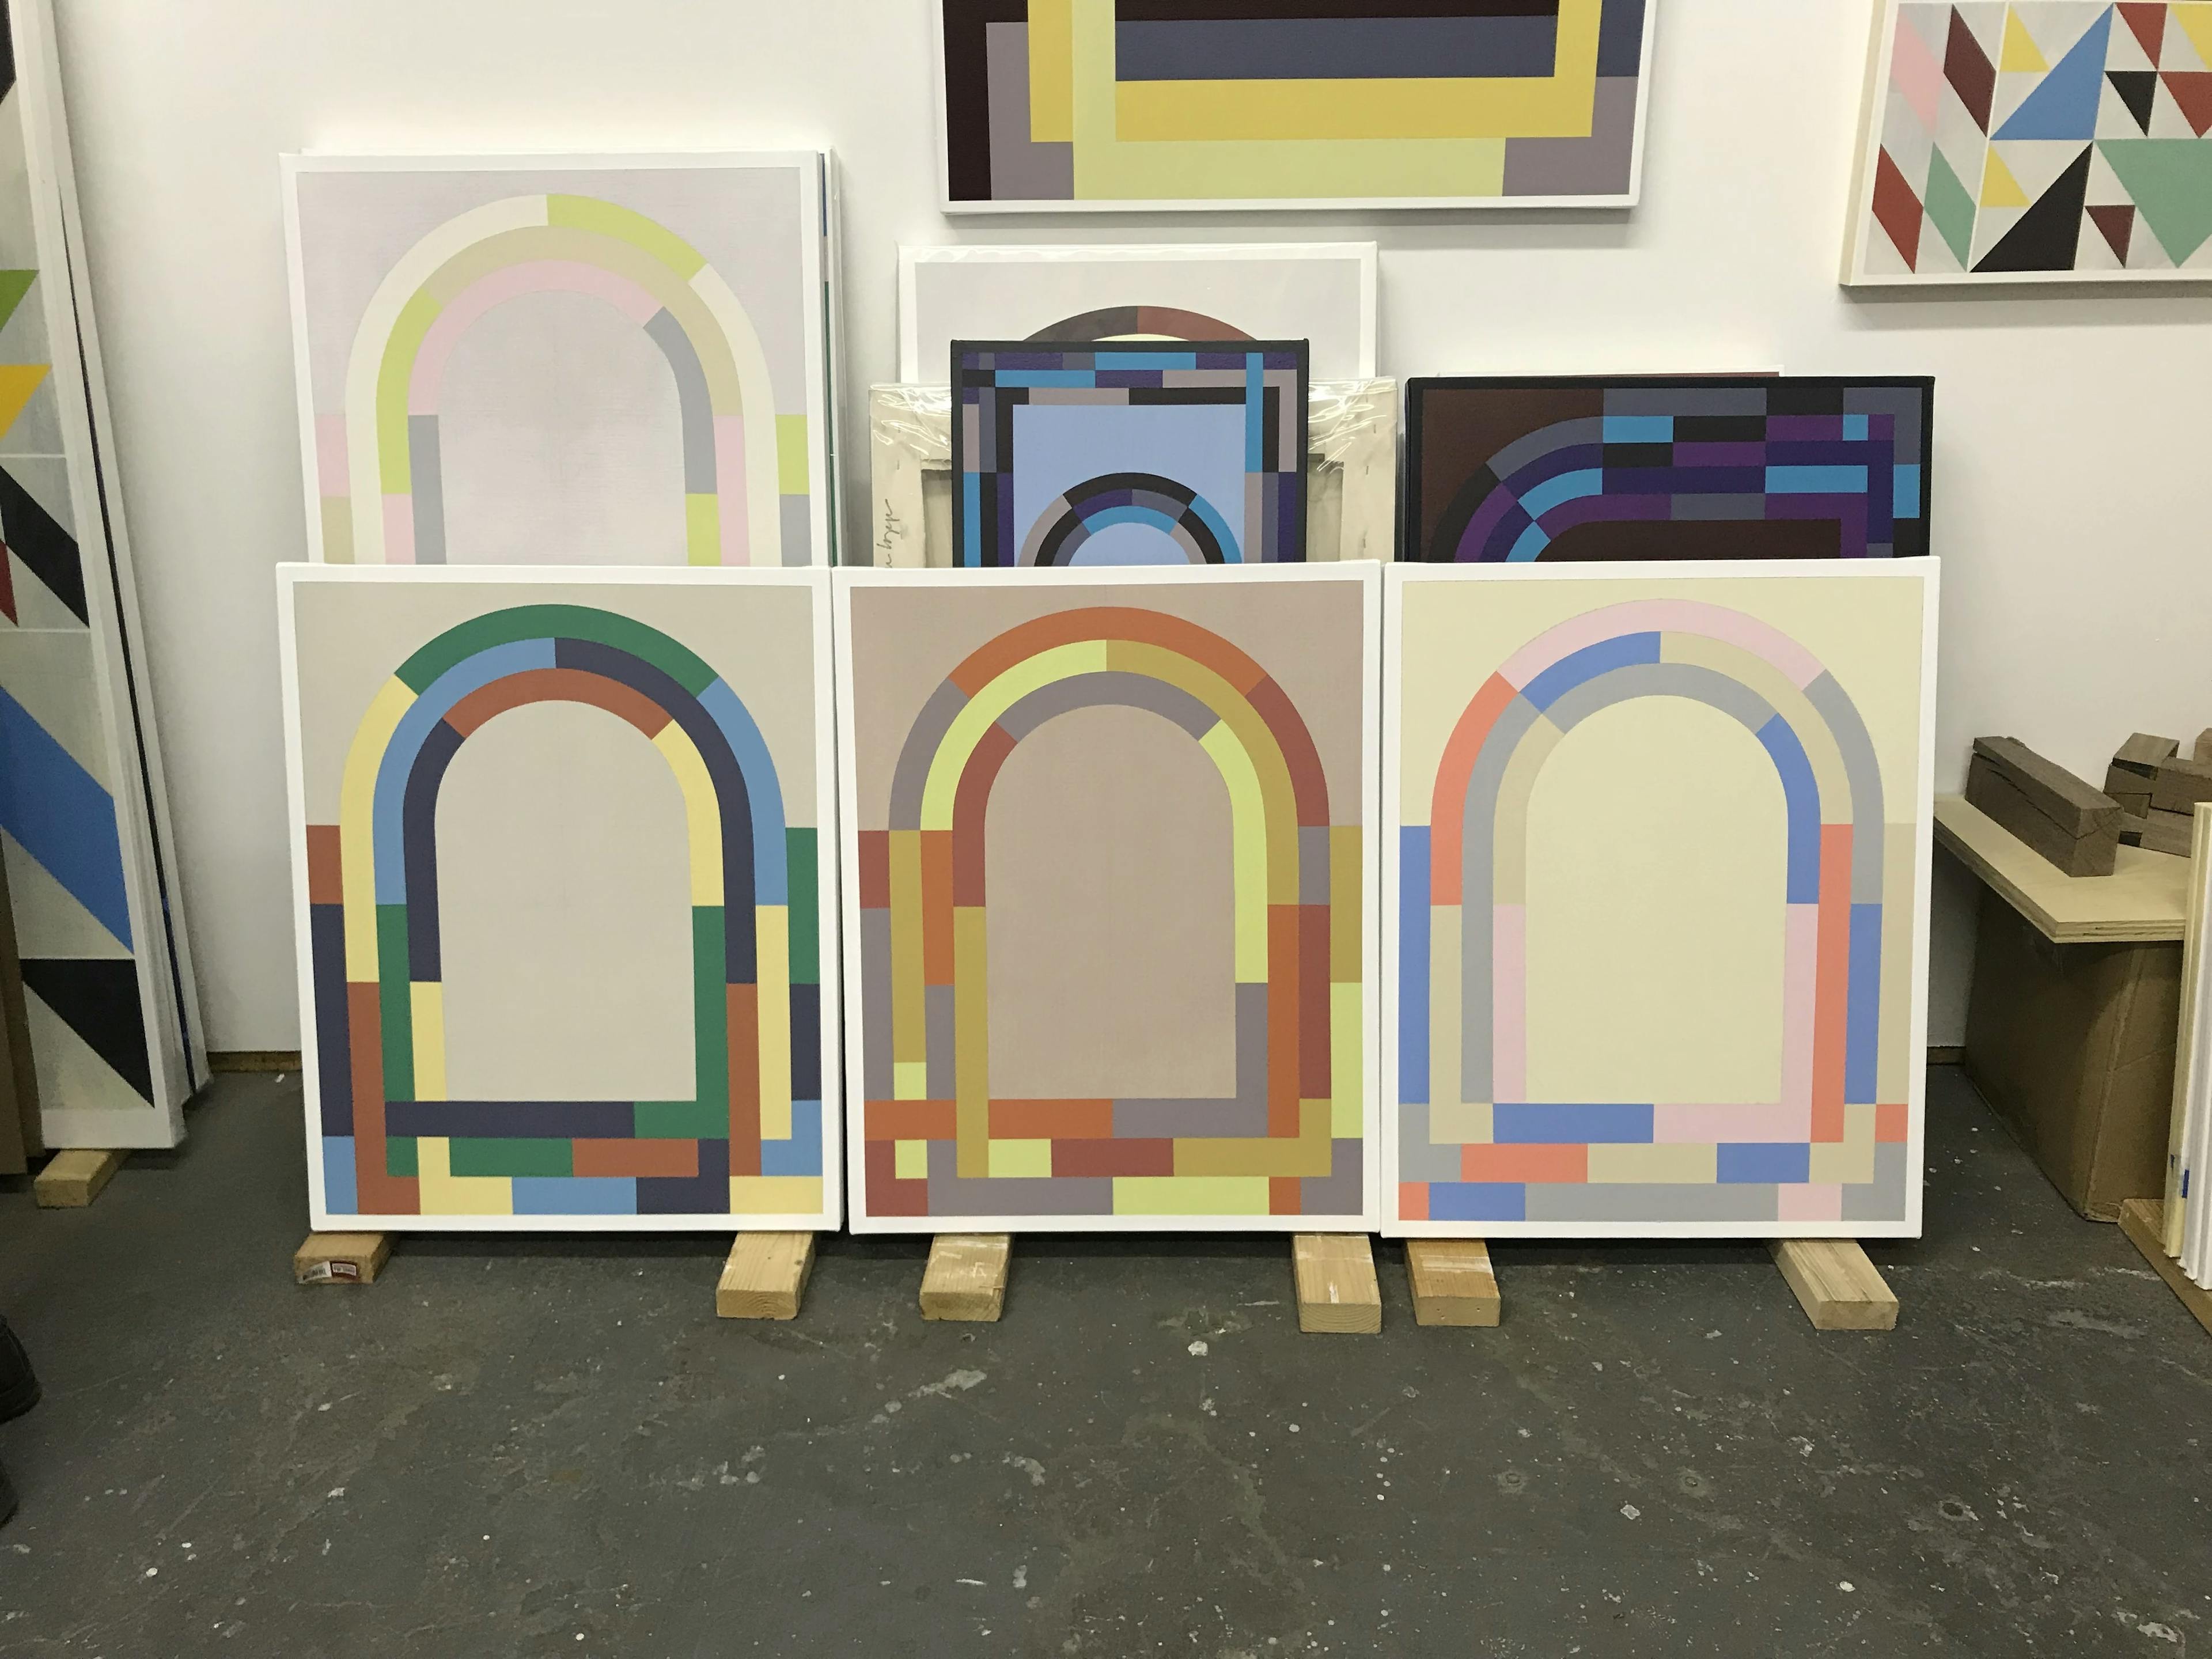 Arched, abstract geometric paintings by artist Christian Nguyen leaning on wooden planks in his studio.